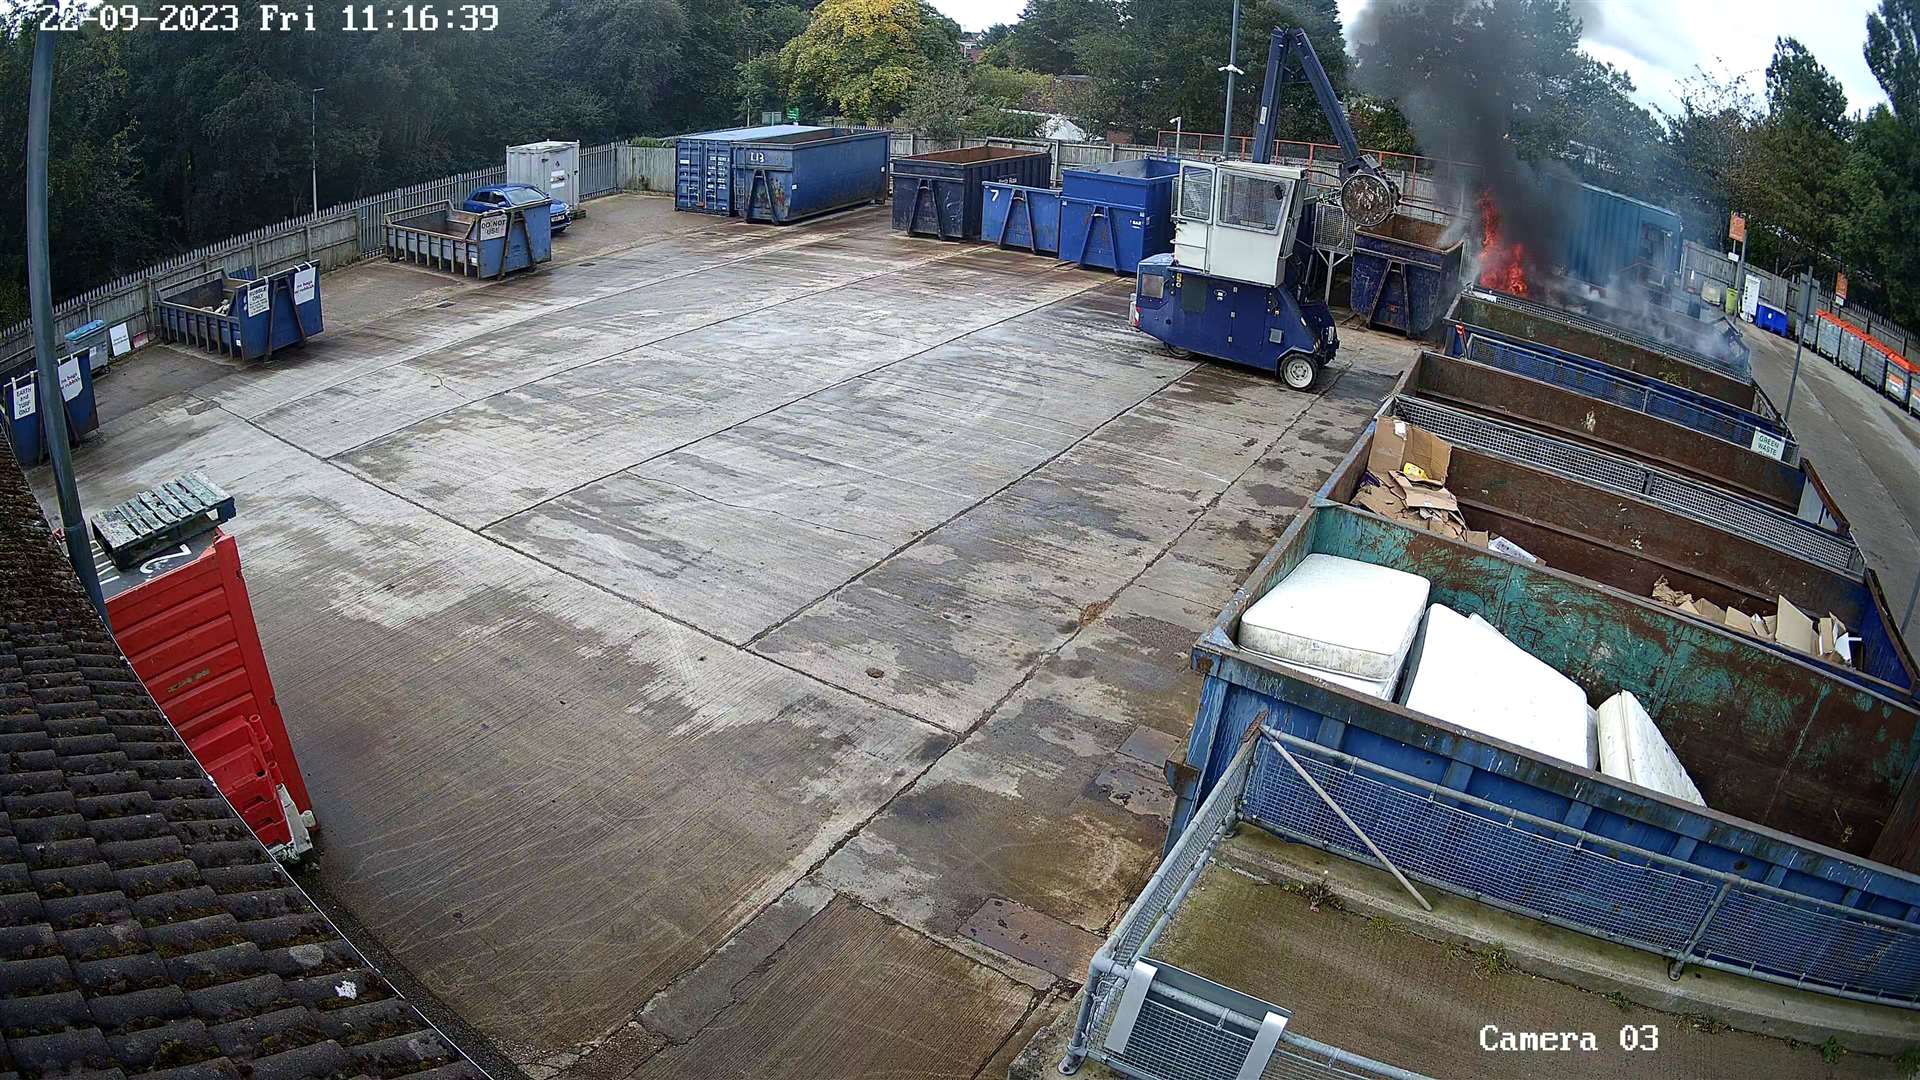 CCTV caught images of the skip fire at Westhill recycling centre.